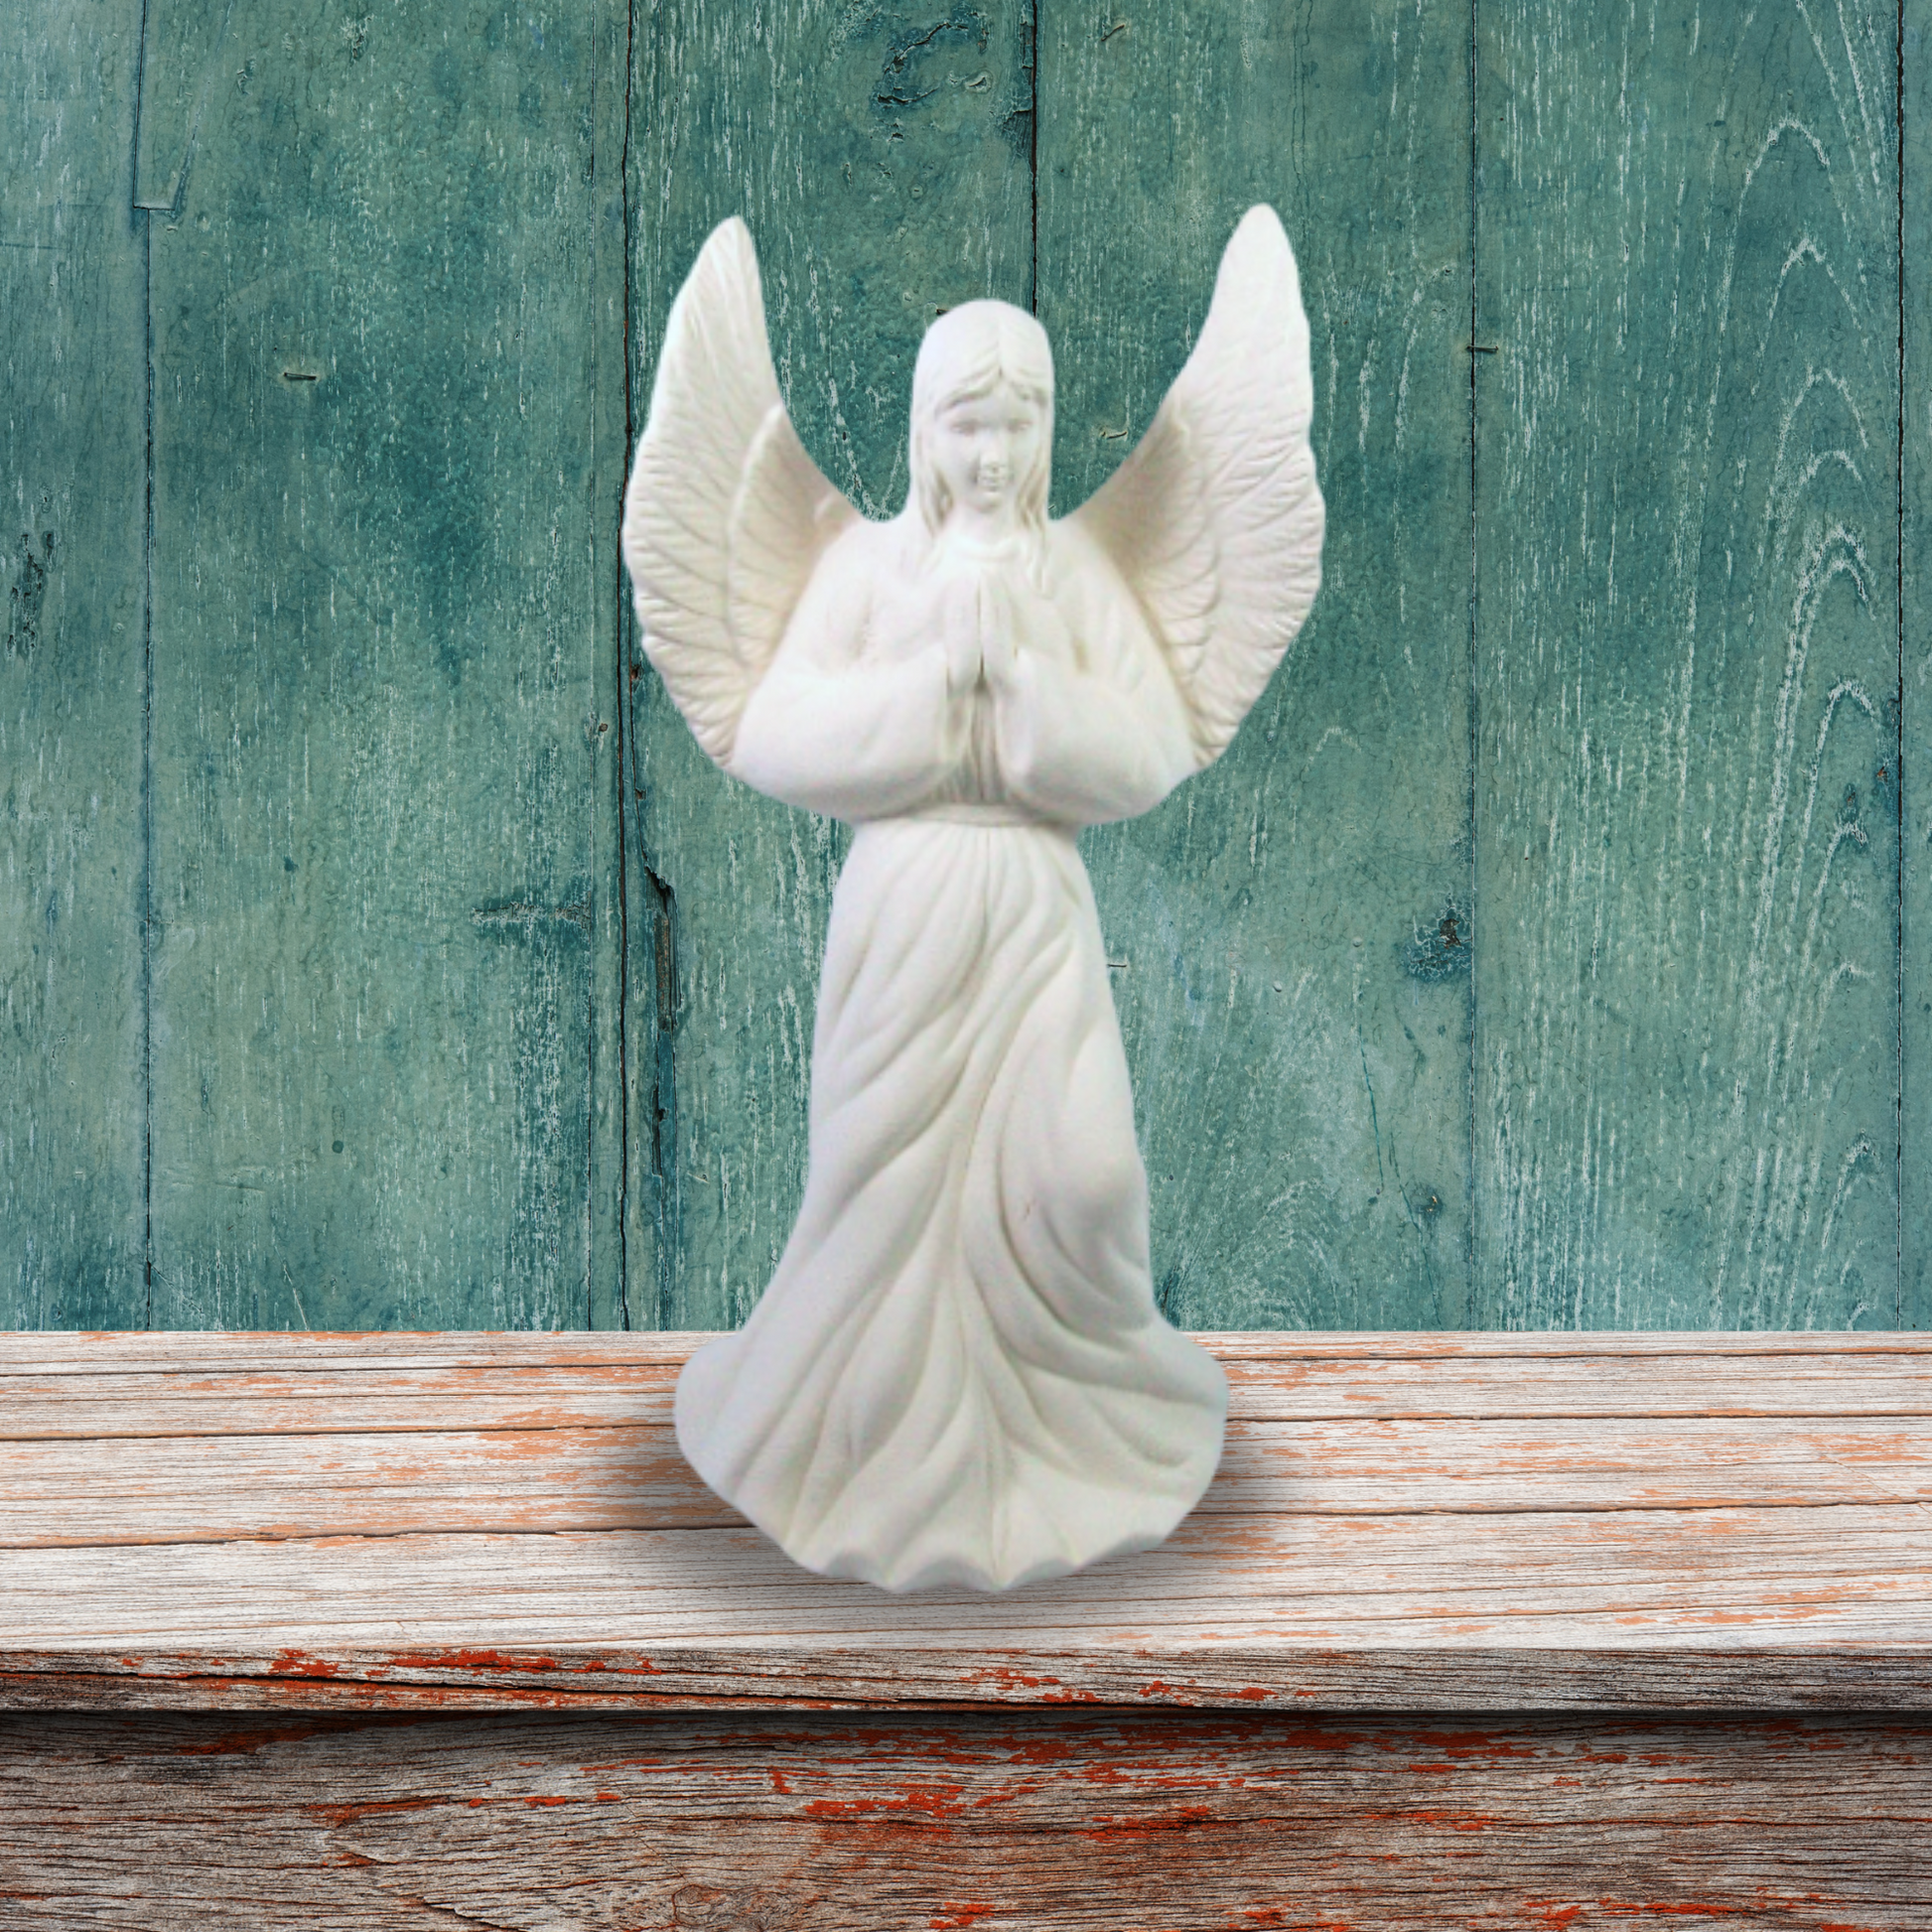 Unpainted angel standing on a brown shelf in front of a rustic green wooden wall.  Her wings are outstretched and her hands are in the prayer position